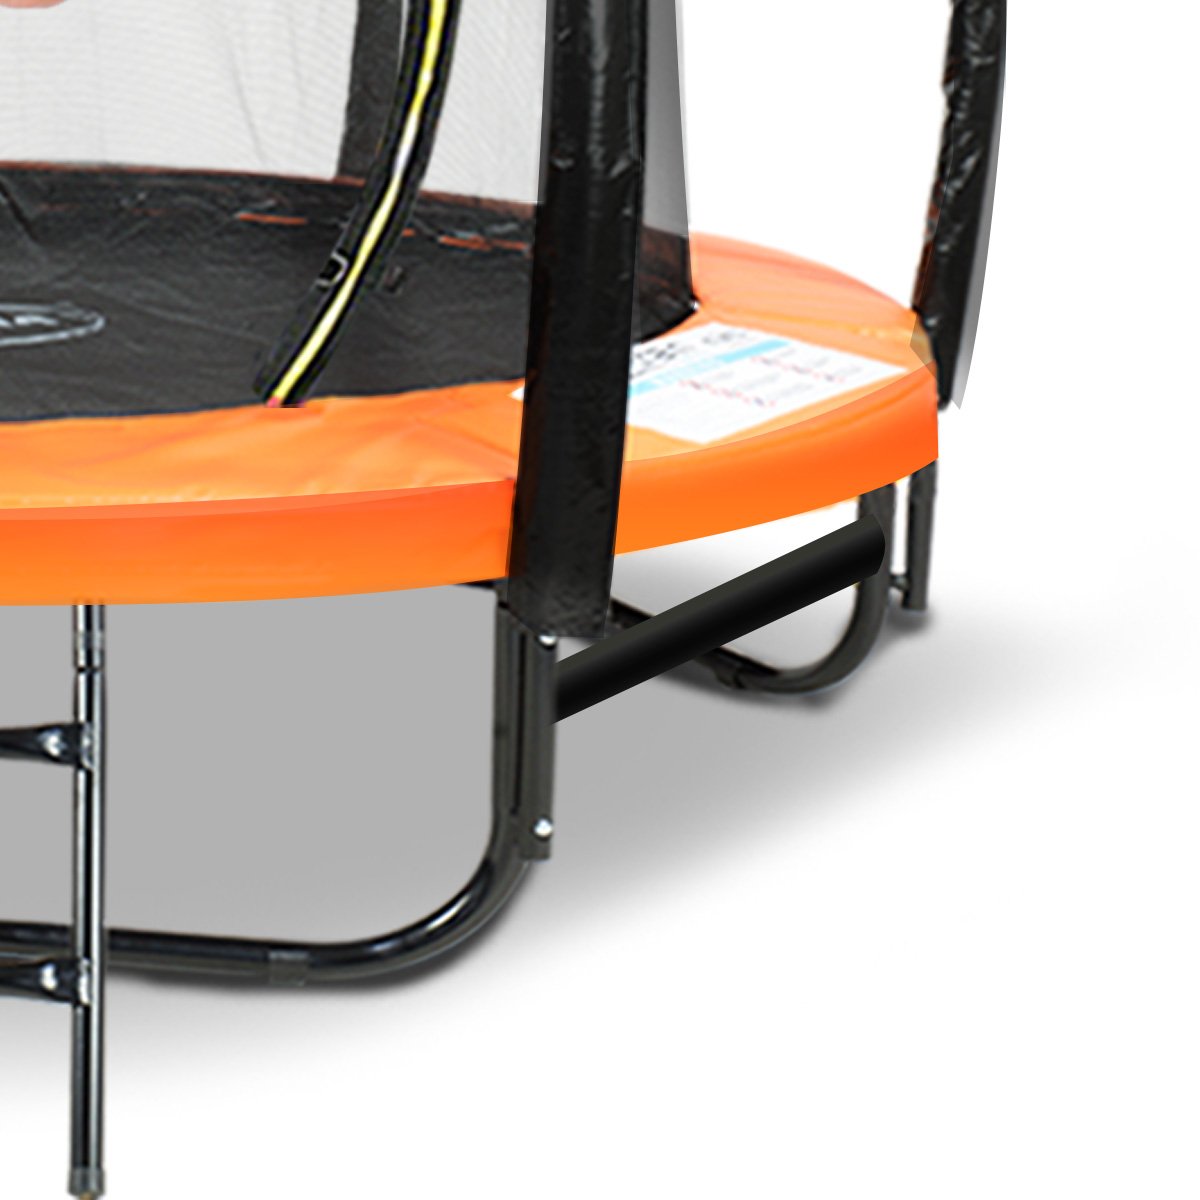 Kahuna 8ft Outdoor Orange Trampoline For Kids And Children Suited For Fitness Exercise Gymnastics With Safety Enclosure Basketball Hoop Set - SILBERSHELL